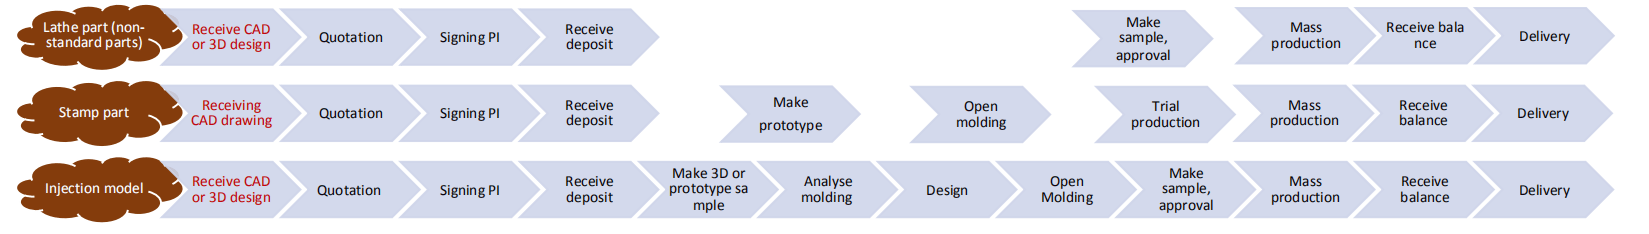 Process for Customizing Products and Services